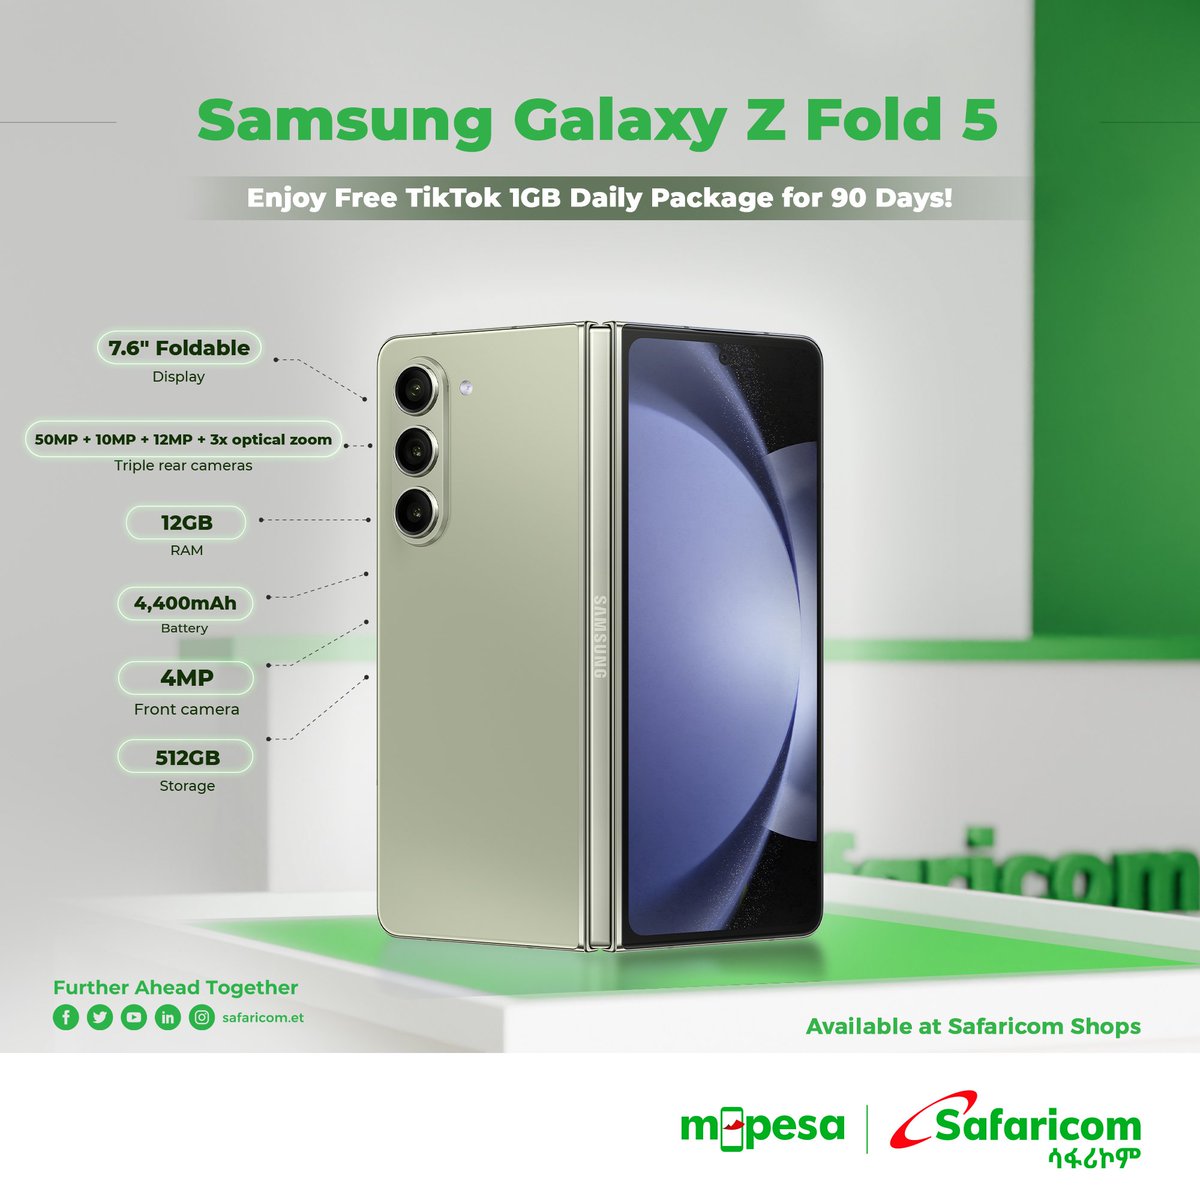 Unfold a world of possibilities. The future of mobile is here with the Samsung Galaxy Z Fold5. Samsung Galaxy Z Fold 5 is now available at Safaricom Ethiopia Shops. Enjoy our 1GB Tiktok Daily Packages for 90 days while you're at it! #SafaricomEthiopia #Furtheraheadtogether